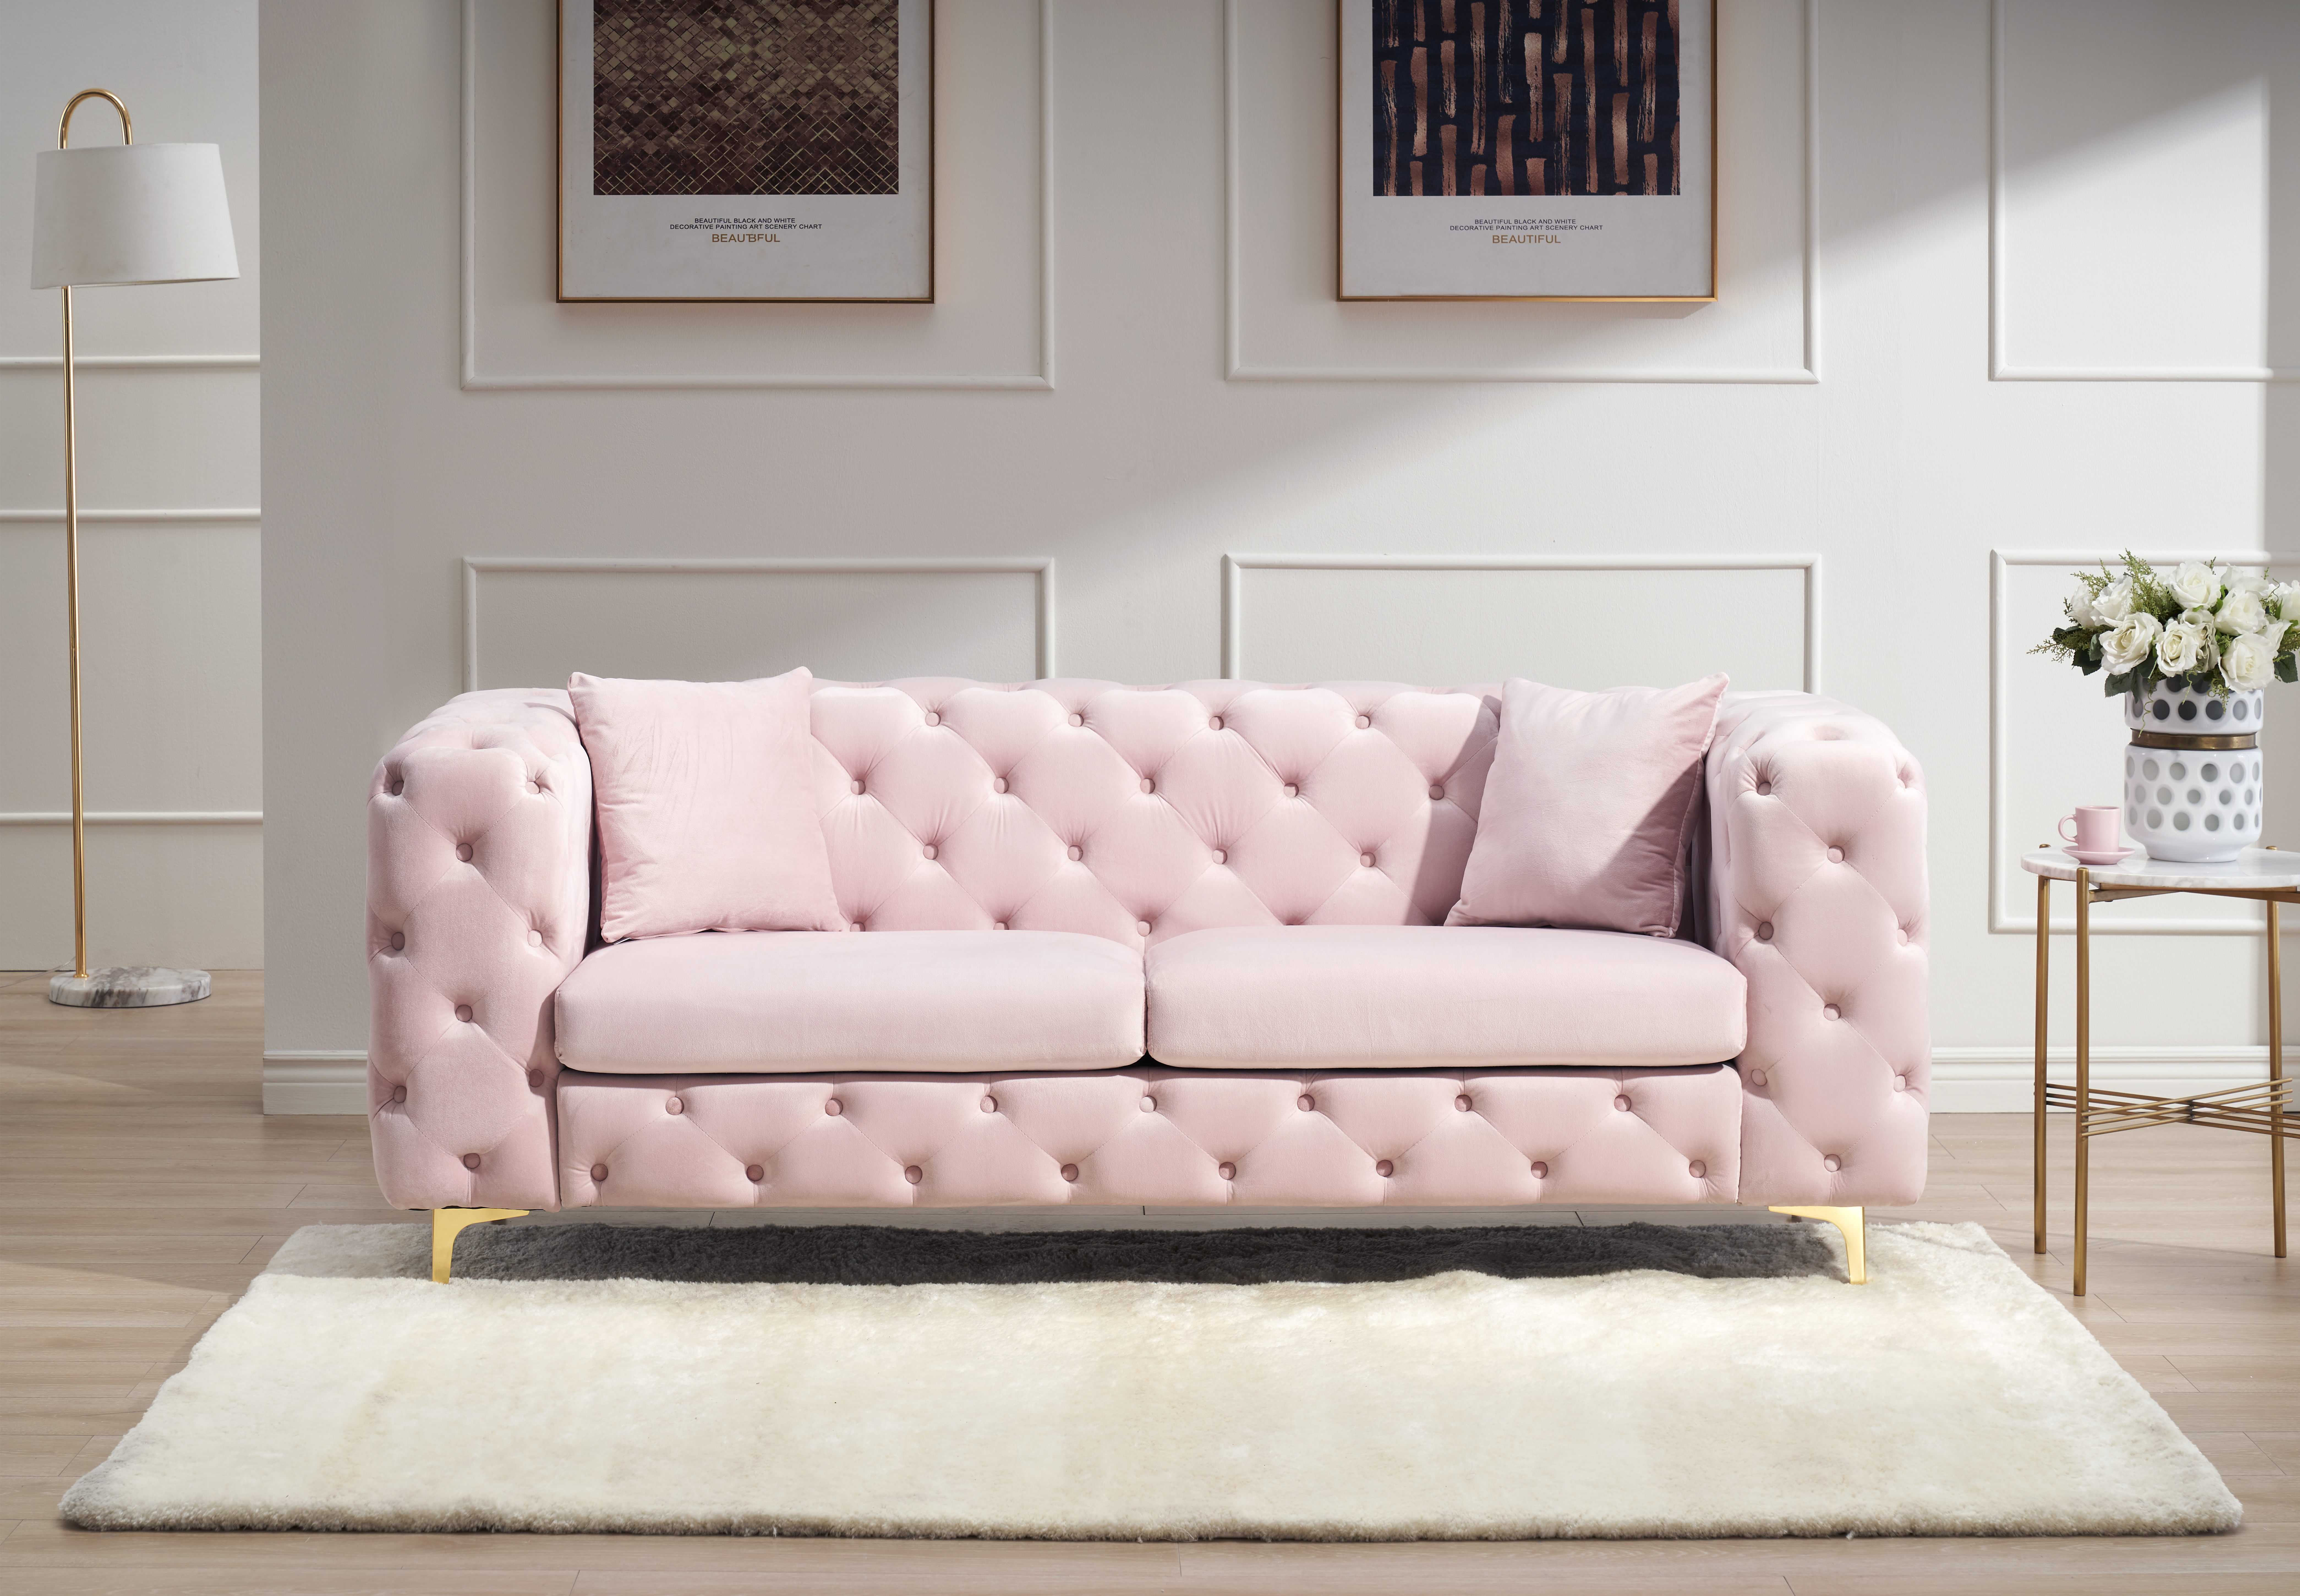 New design comfortable pink loveseat with two throw pillows in the same color-CASAINC